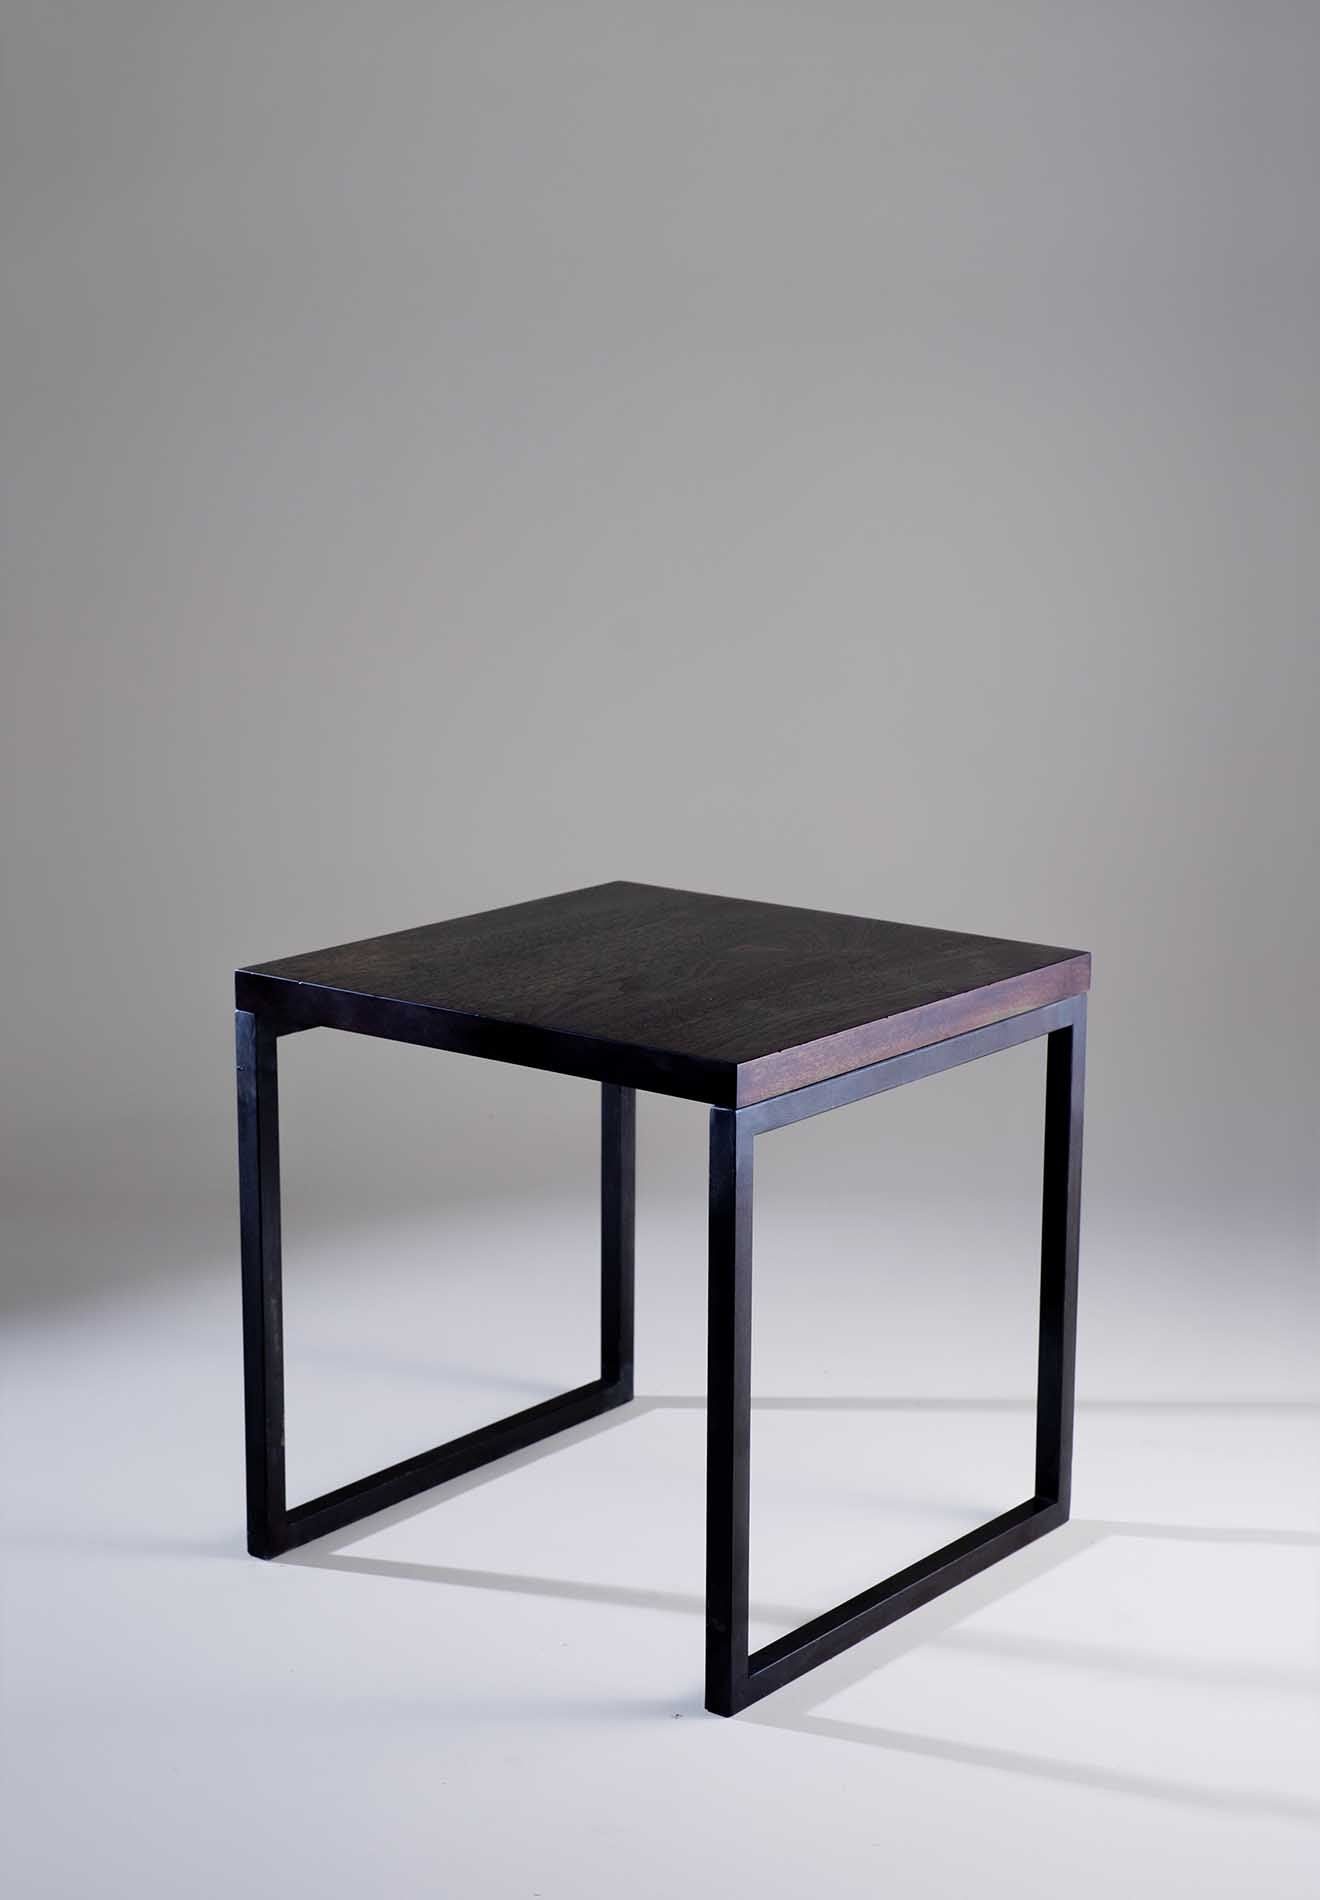 Caulfield Table in Carbon shown with Blackened Walnut Top